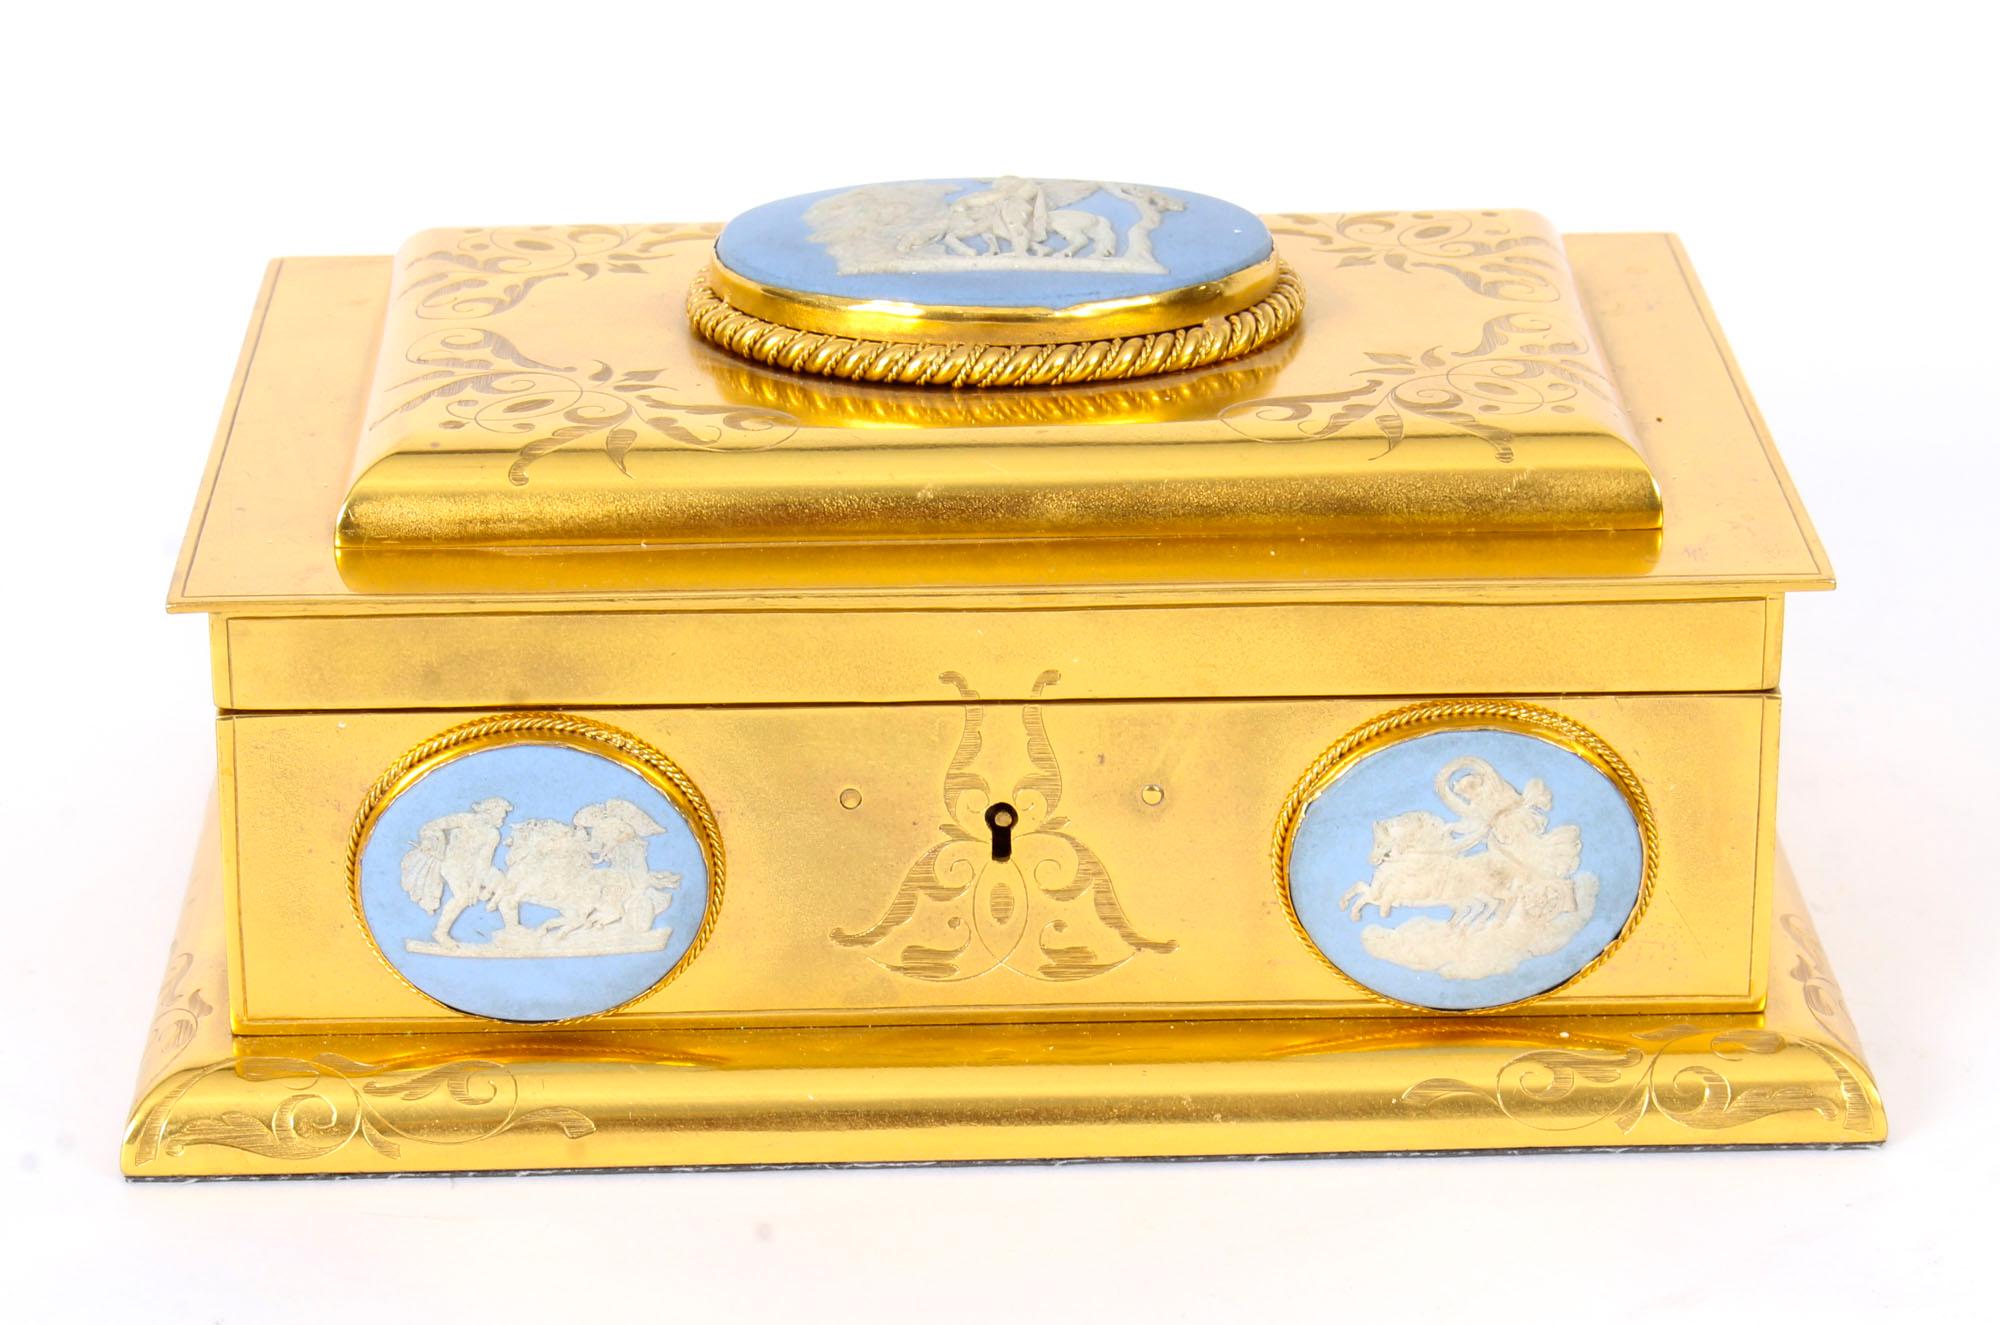 This is a truly magnificent antique Victorian ormolu luxury casket by Asprey London, circa 1870 in date.
 
This exceptional casket is rectangular in shape and features sumptuous applied jasperware plaques of oval shape - four plaques are